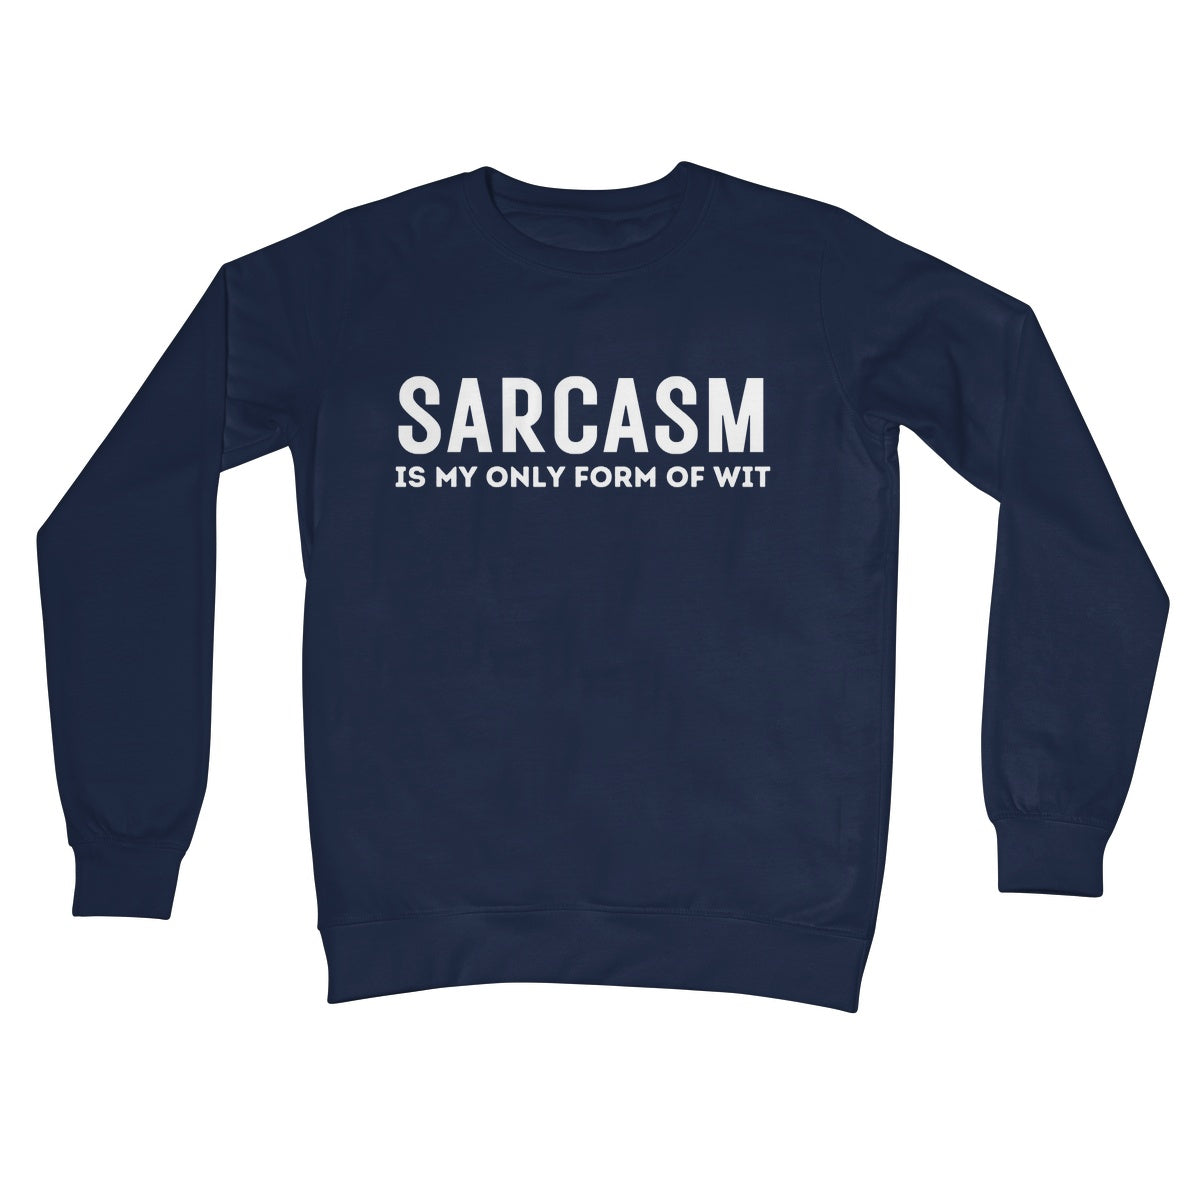 sarcasm is my only form of wit jumper navy